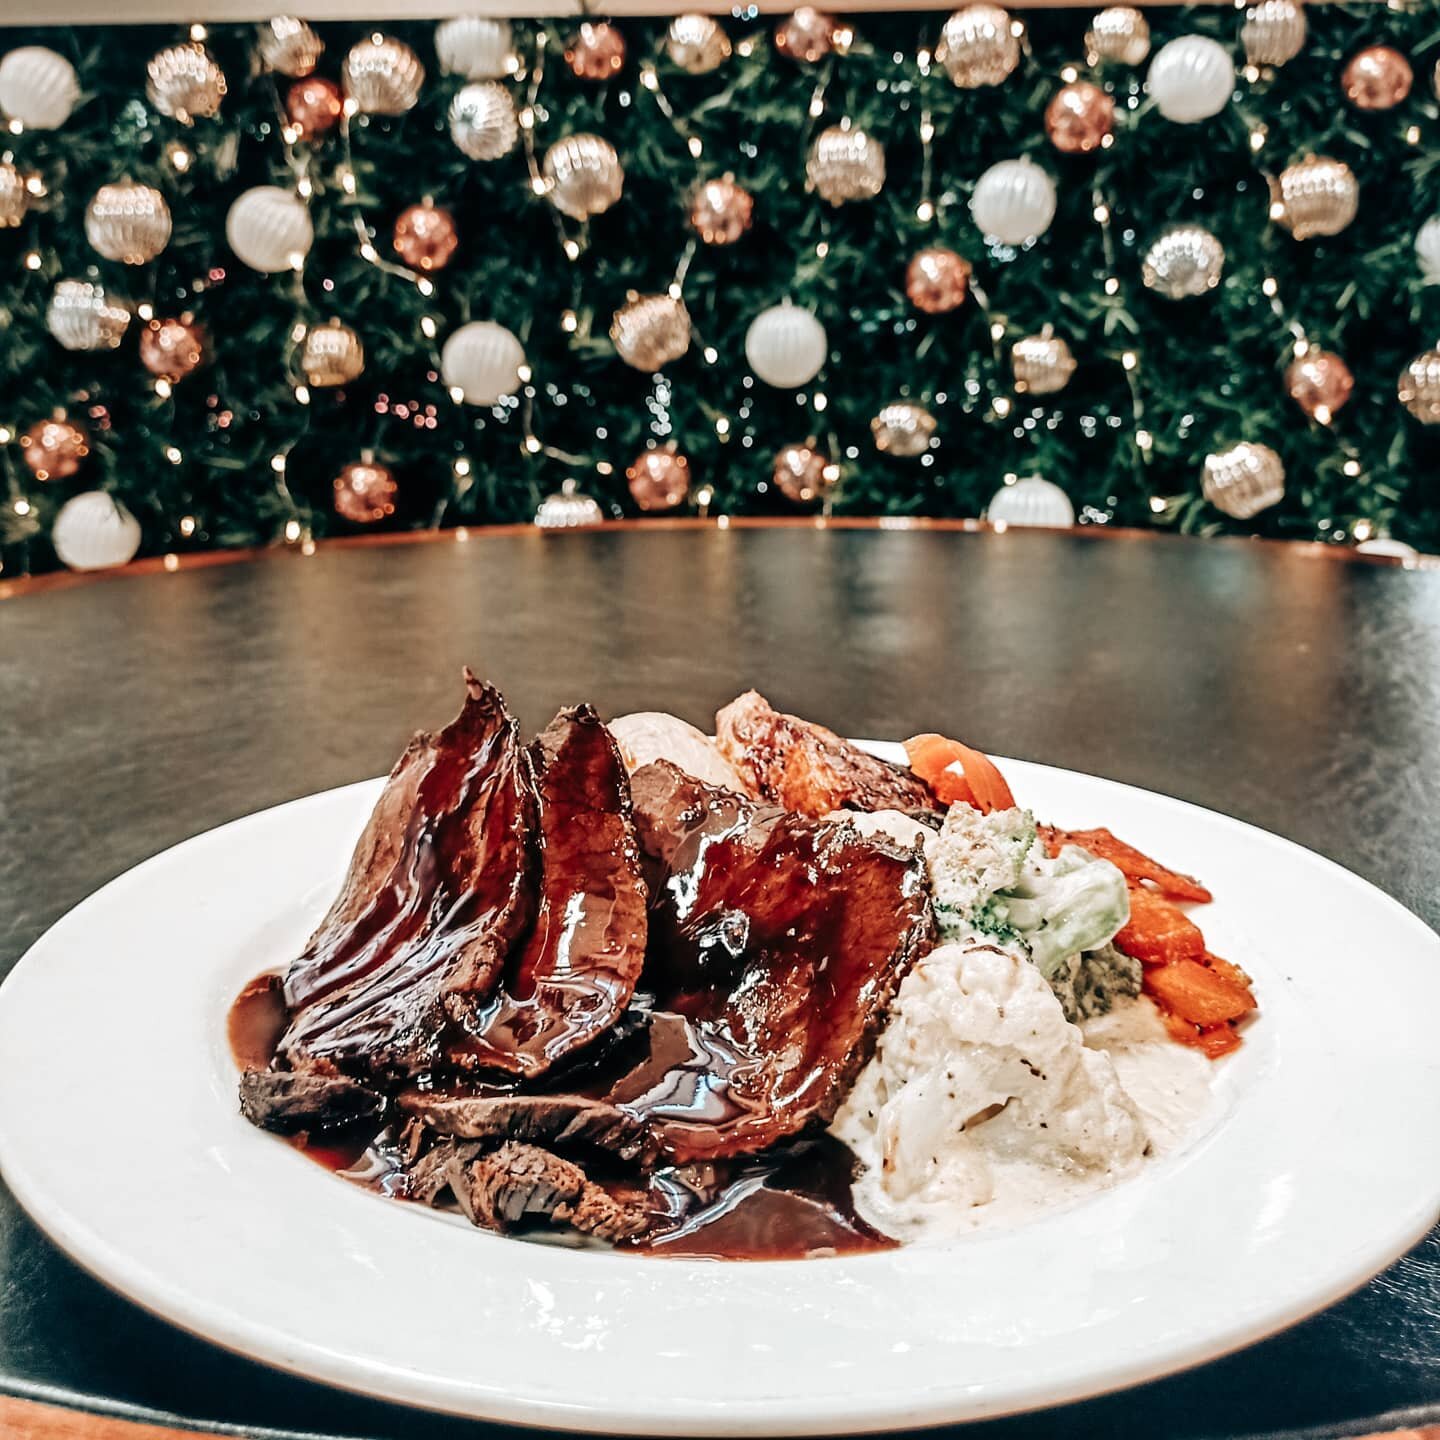 Indulge yourself tonight with a succulent roast beef from our 2-4-1 specials 🎀
#mondaynightroast #foodstagram 
#startingtofeellikechristmas 
#241meals